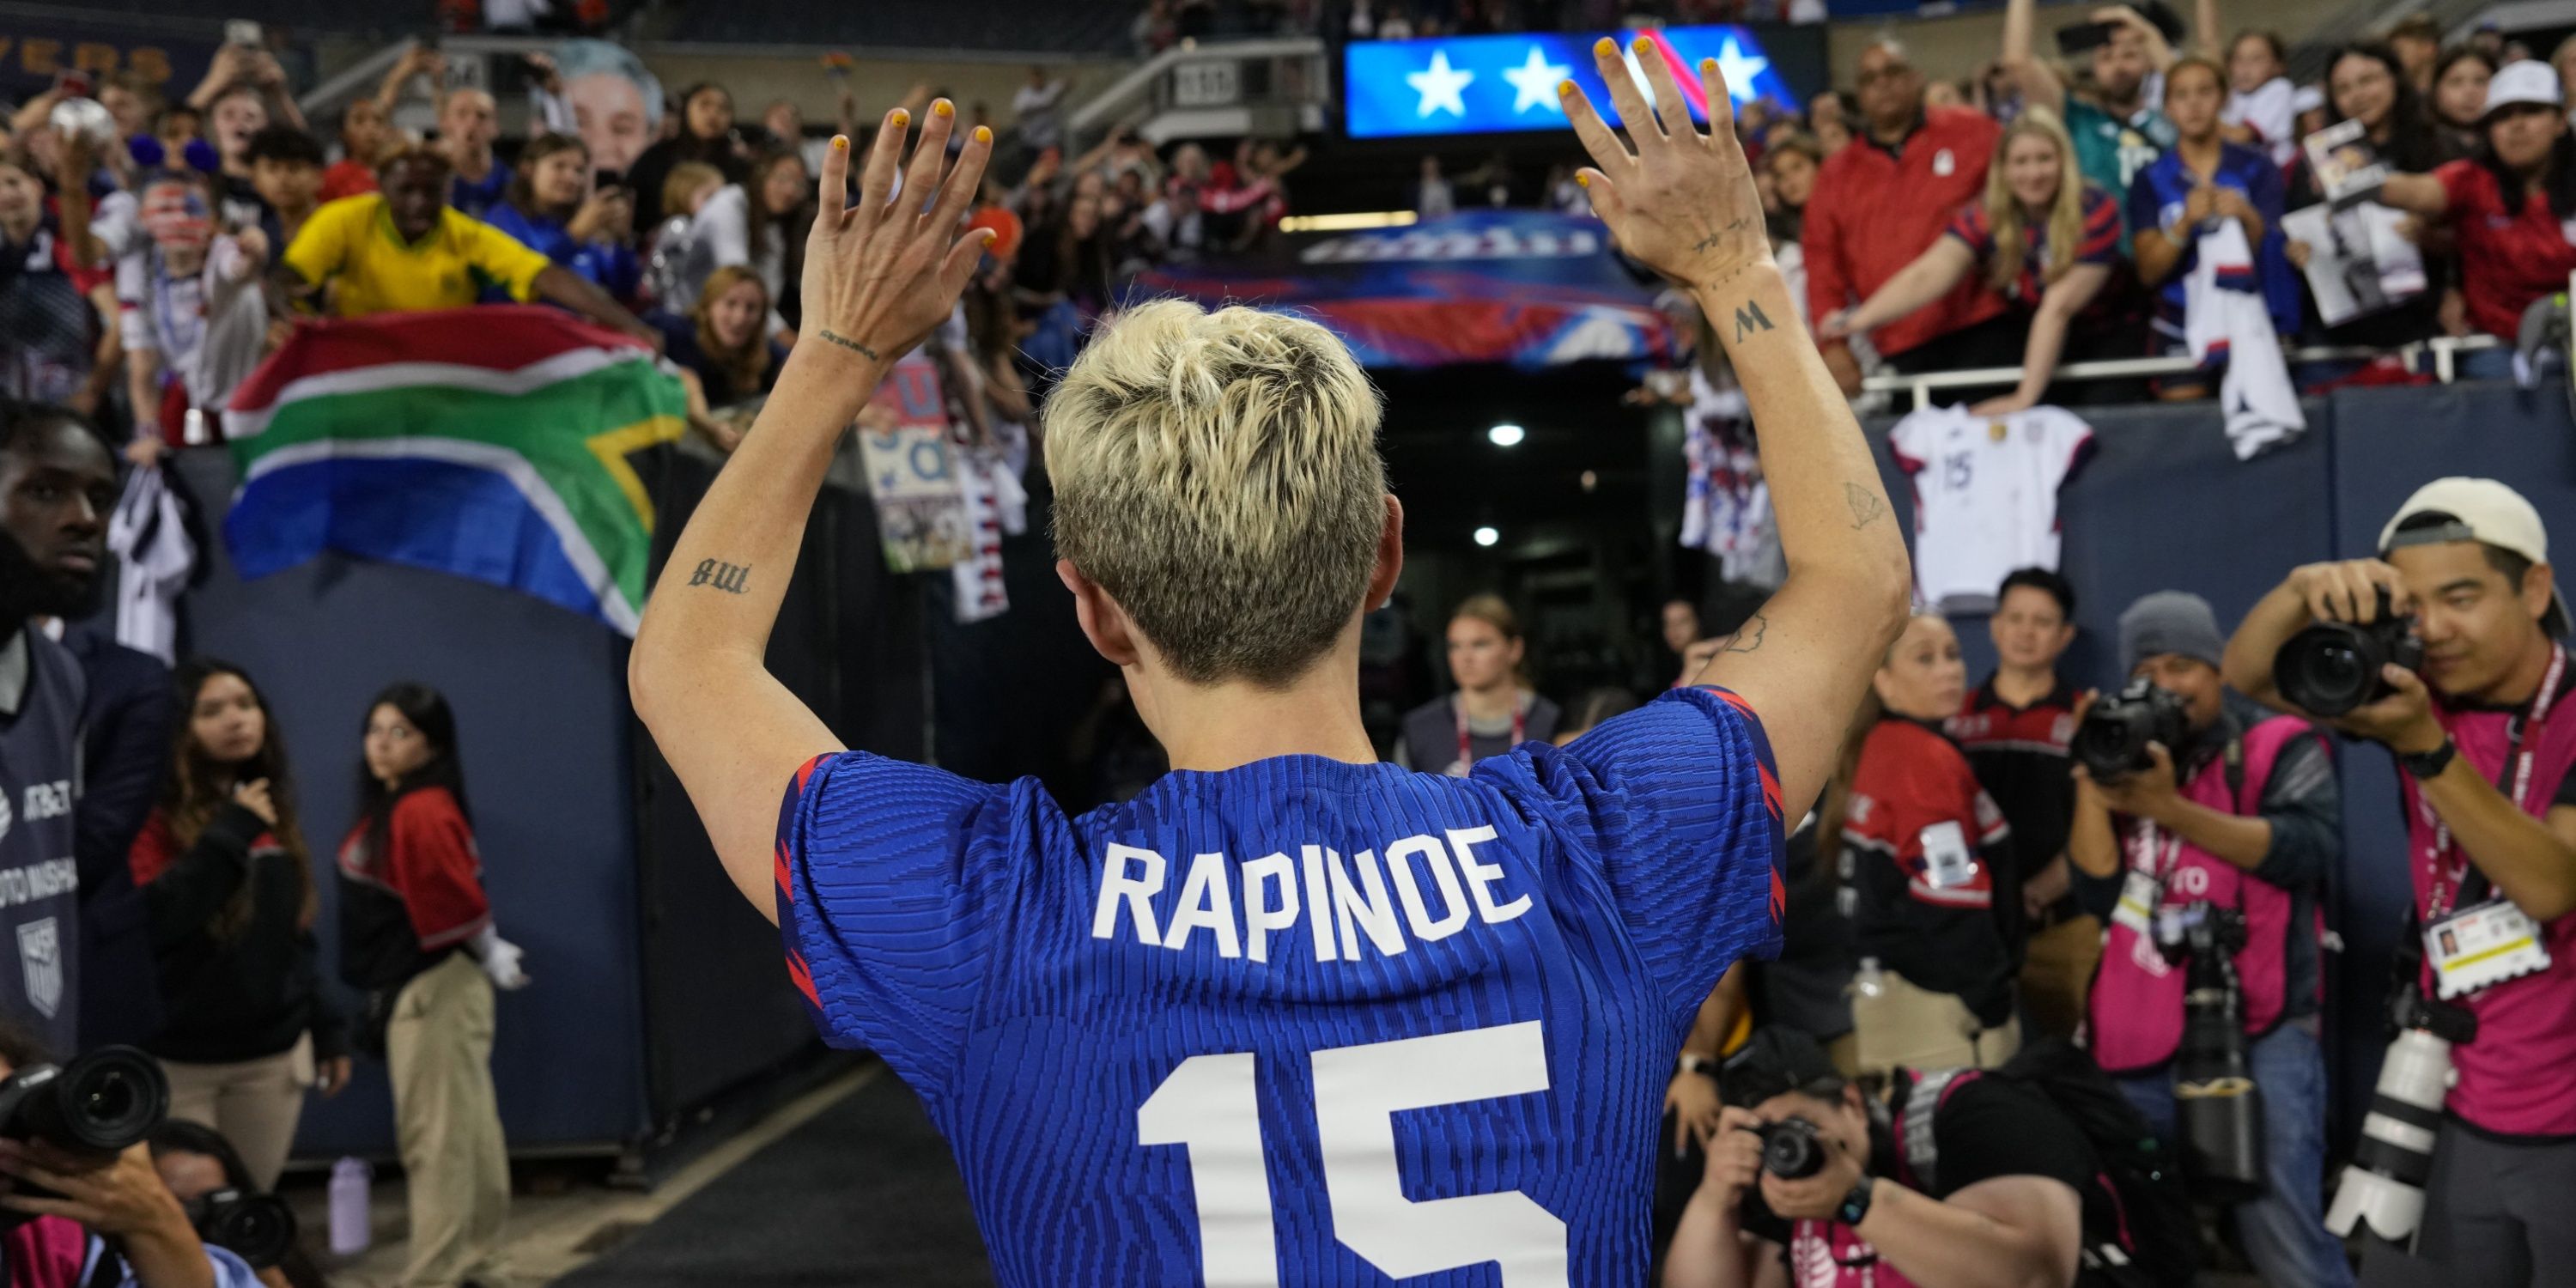 Megan Rapinoe at her final match for the USWNT